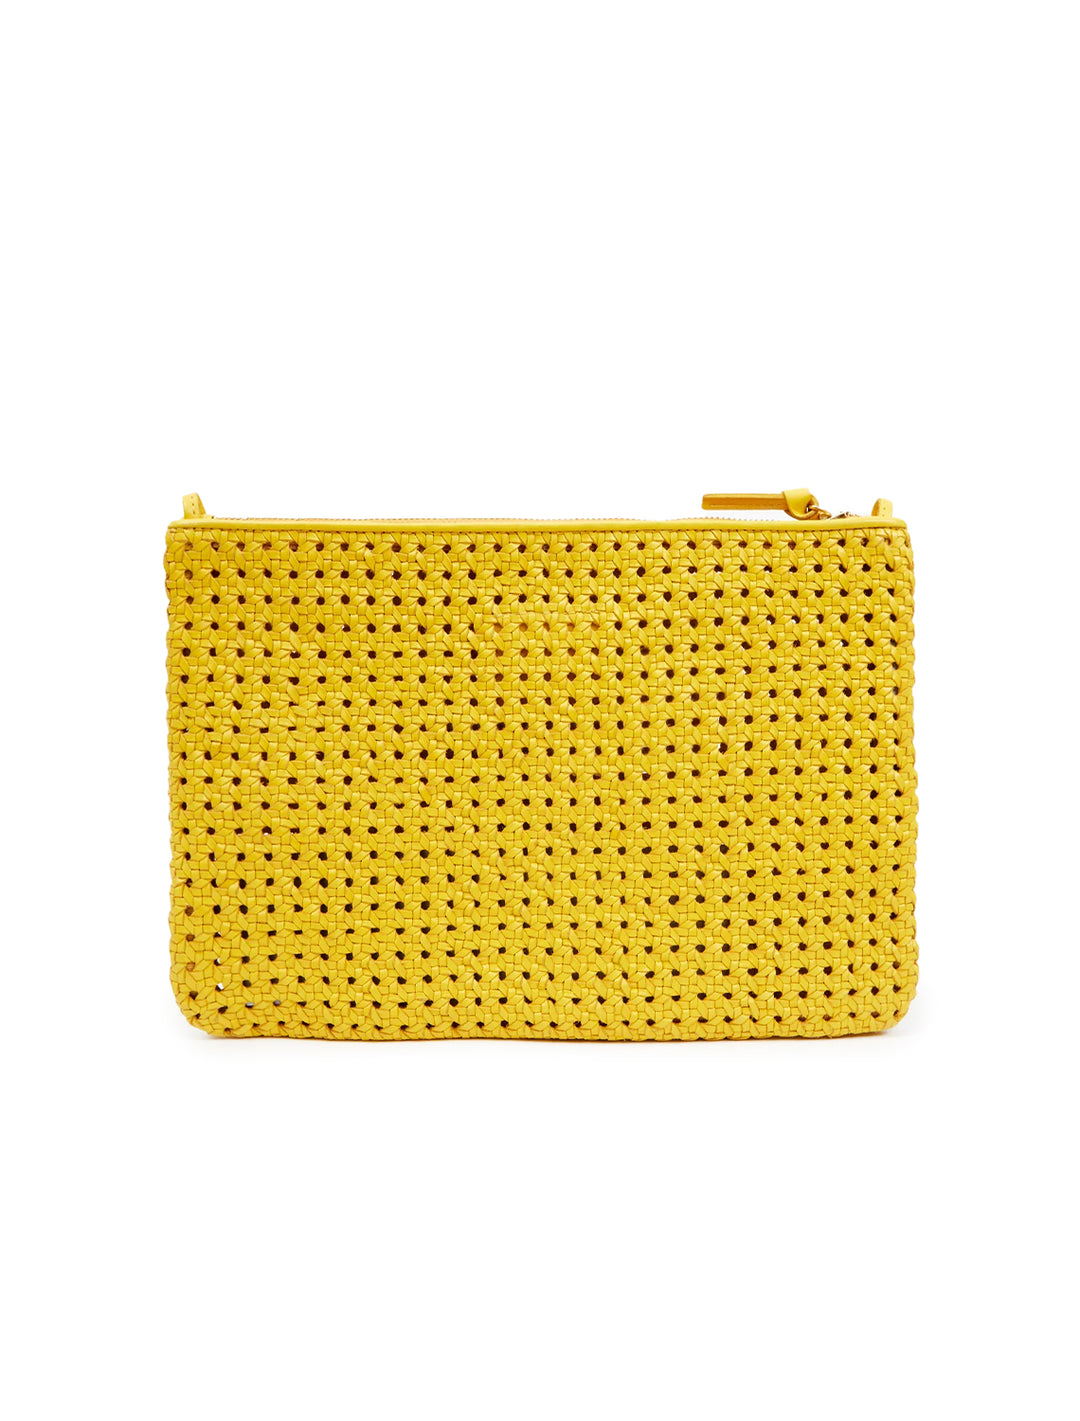 Back view of Clare V.'s flat clutch with tabs in dandelion rattan.